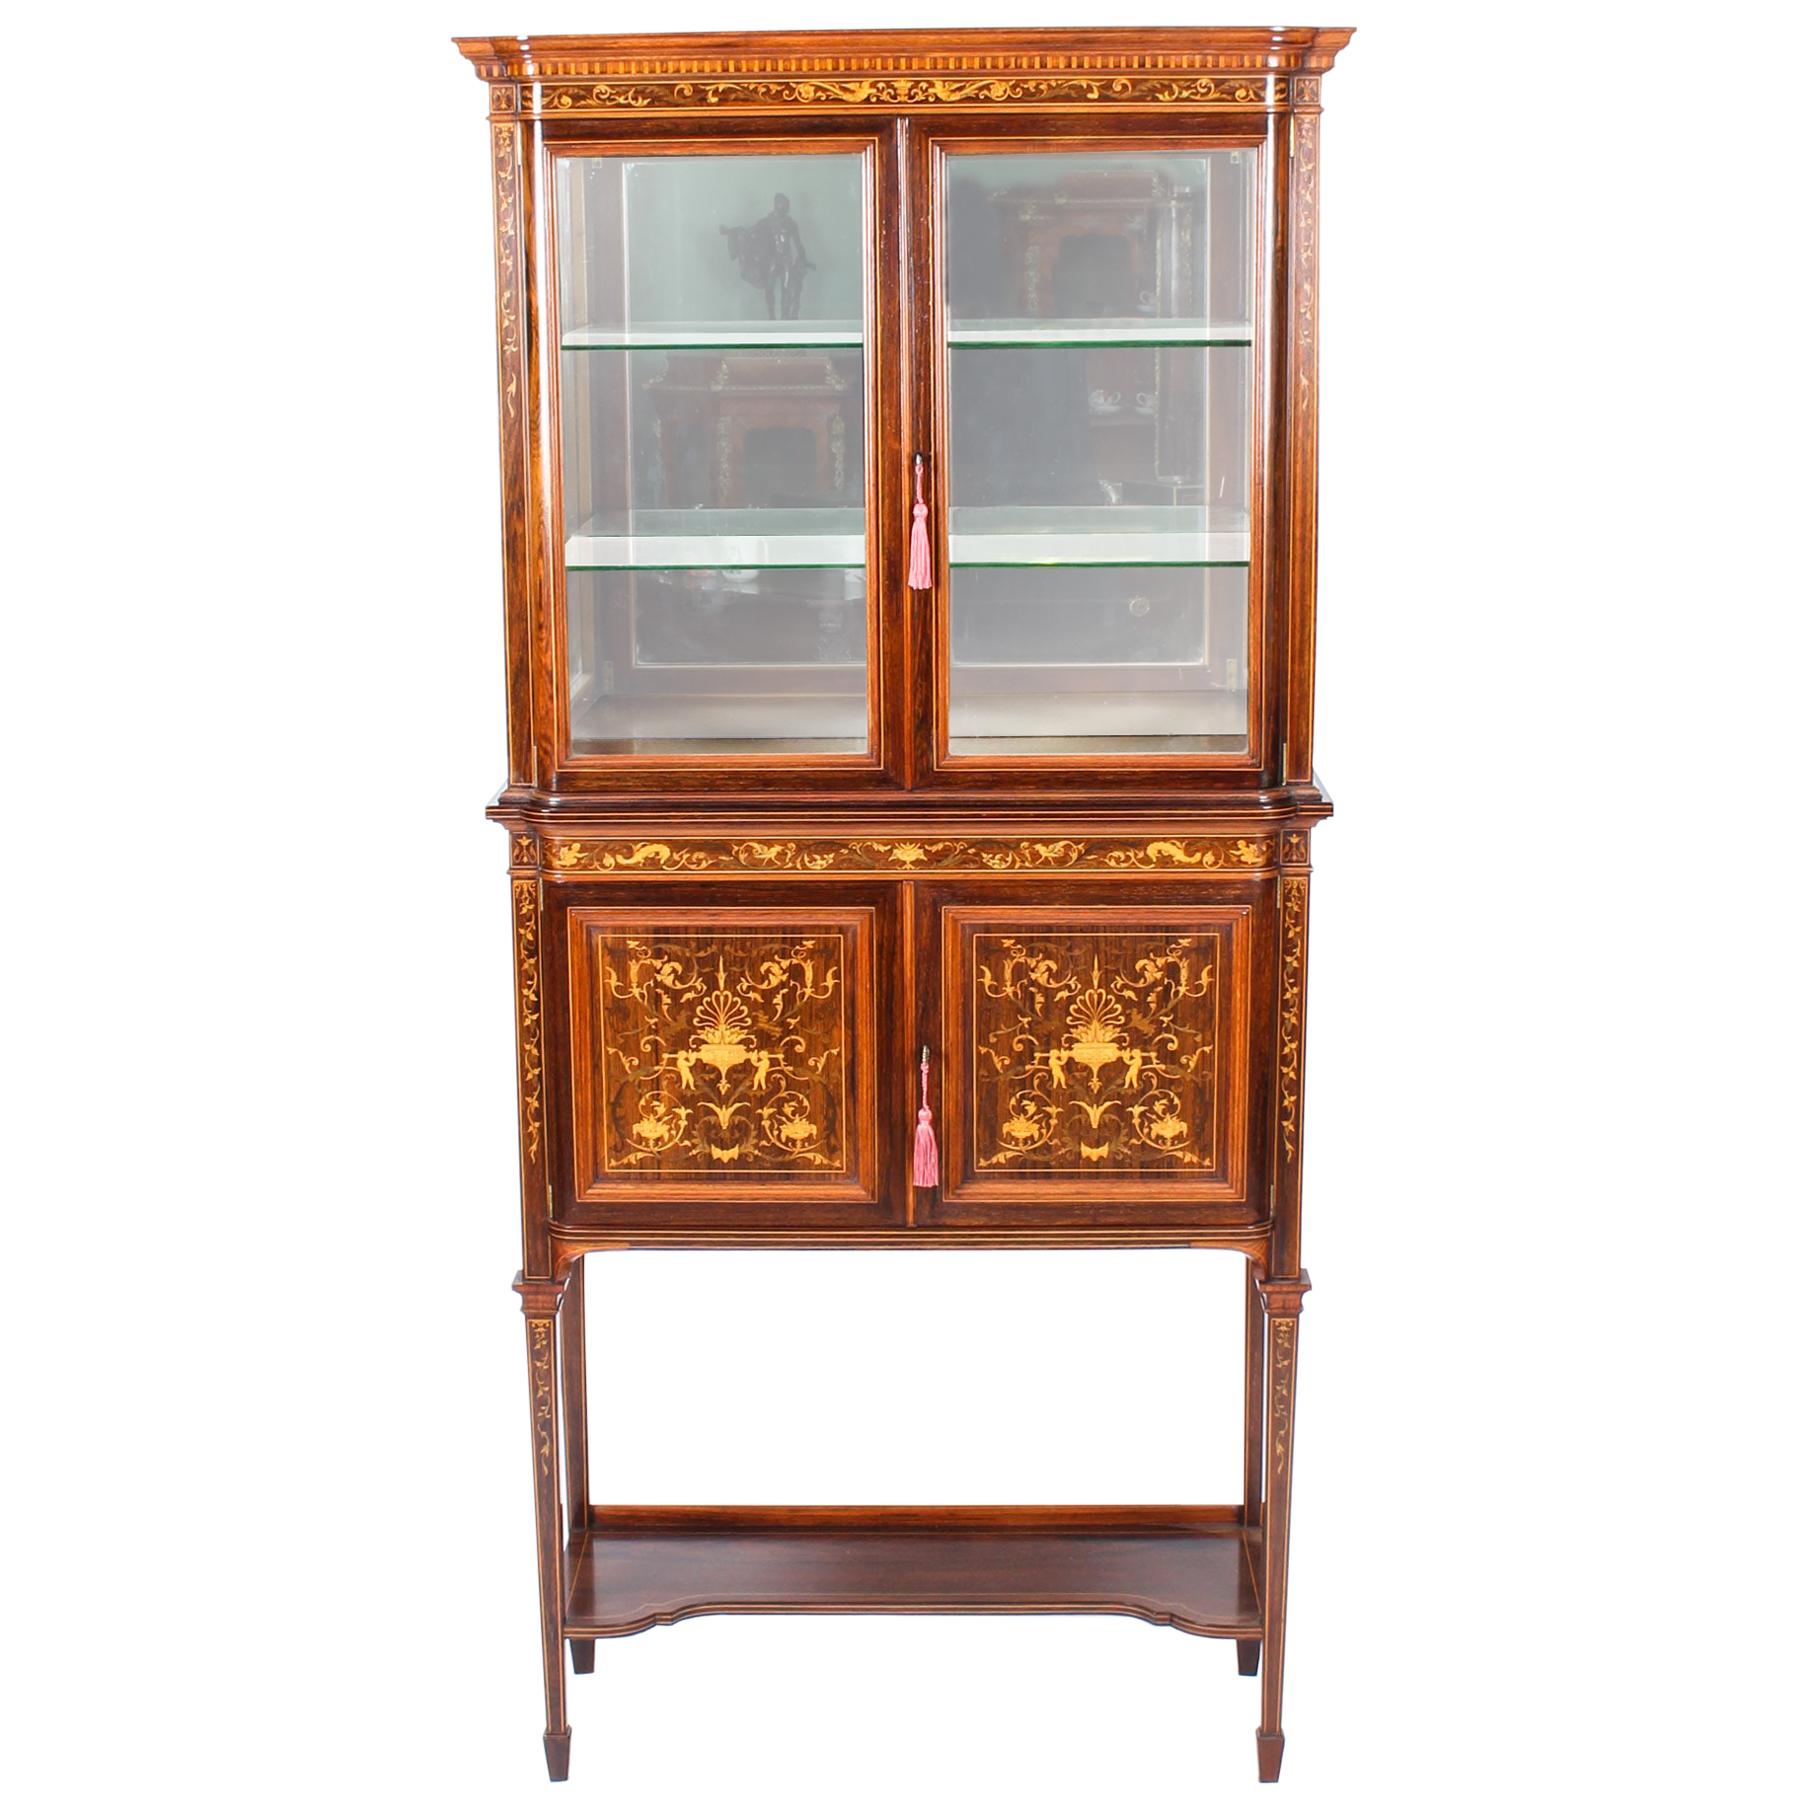 Antique Edwardian Inlaid Display Cabinet by Edwards & Roberts, 19th Century